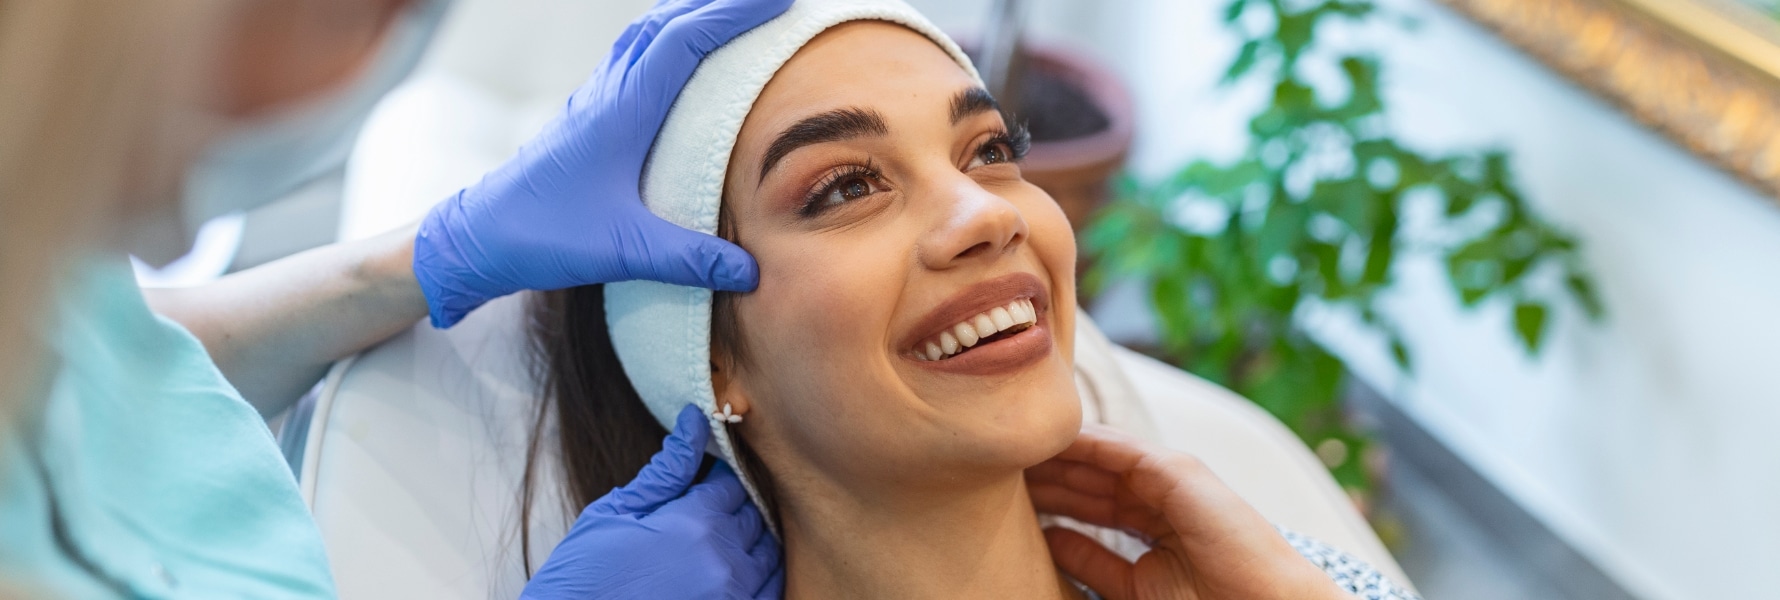 closeup image of young woman getting medical dermatology treatment